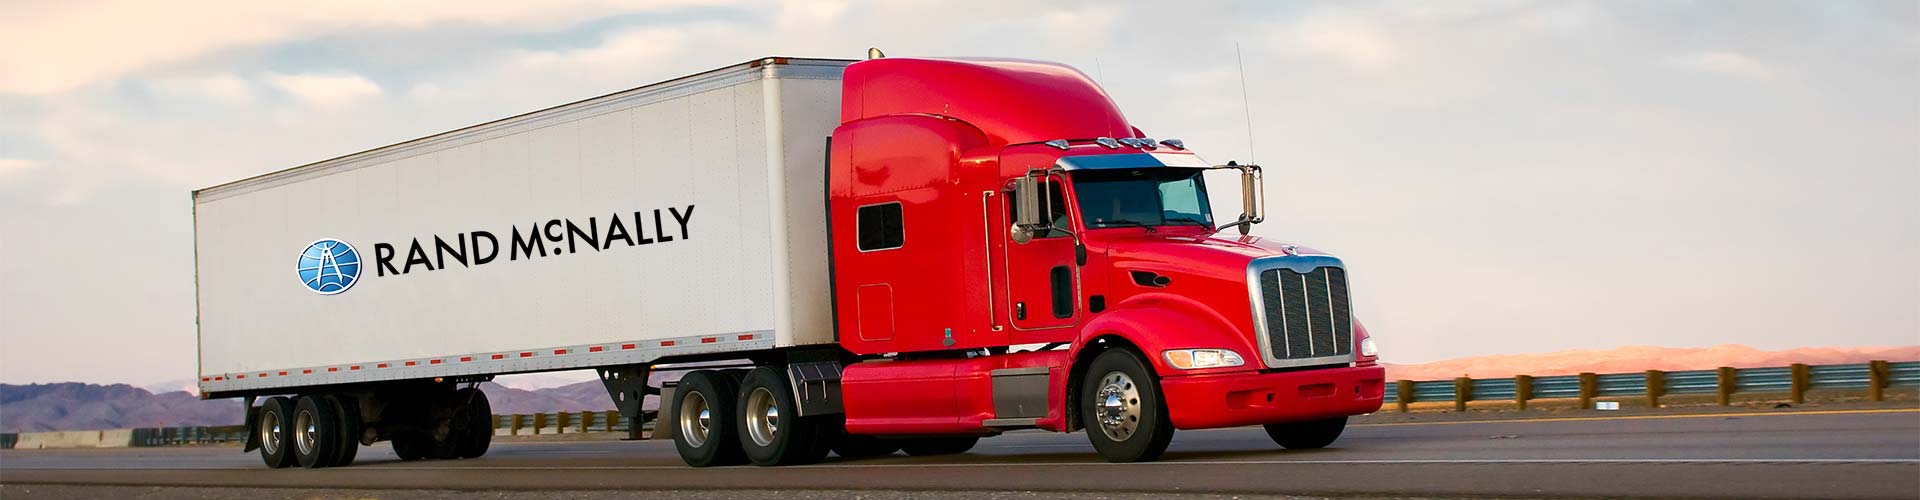 ELD and HOS Trucking Software Solutions | Rand McNally